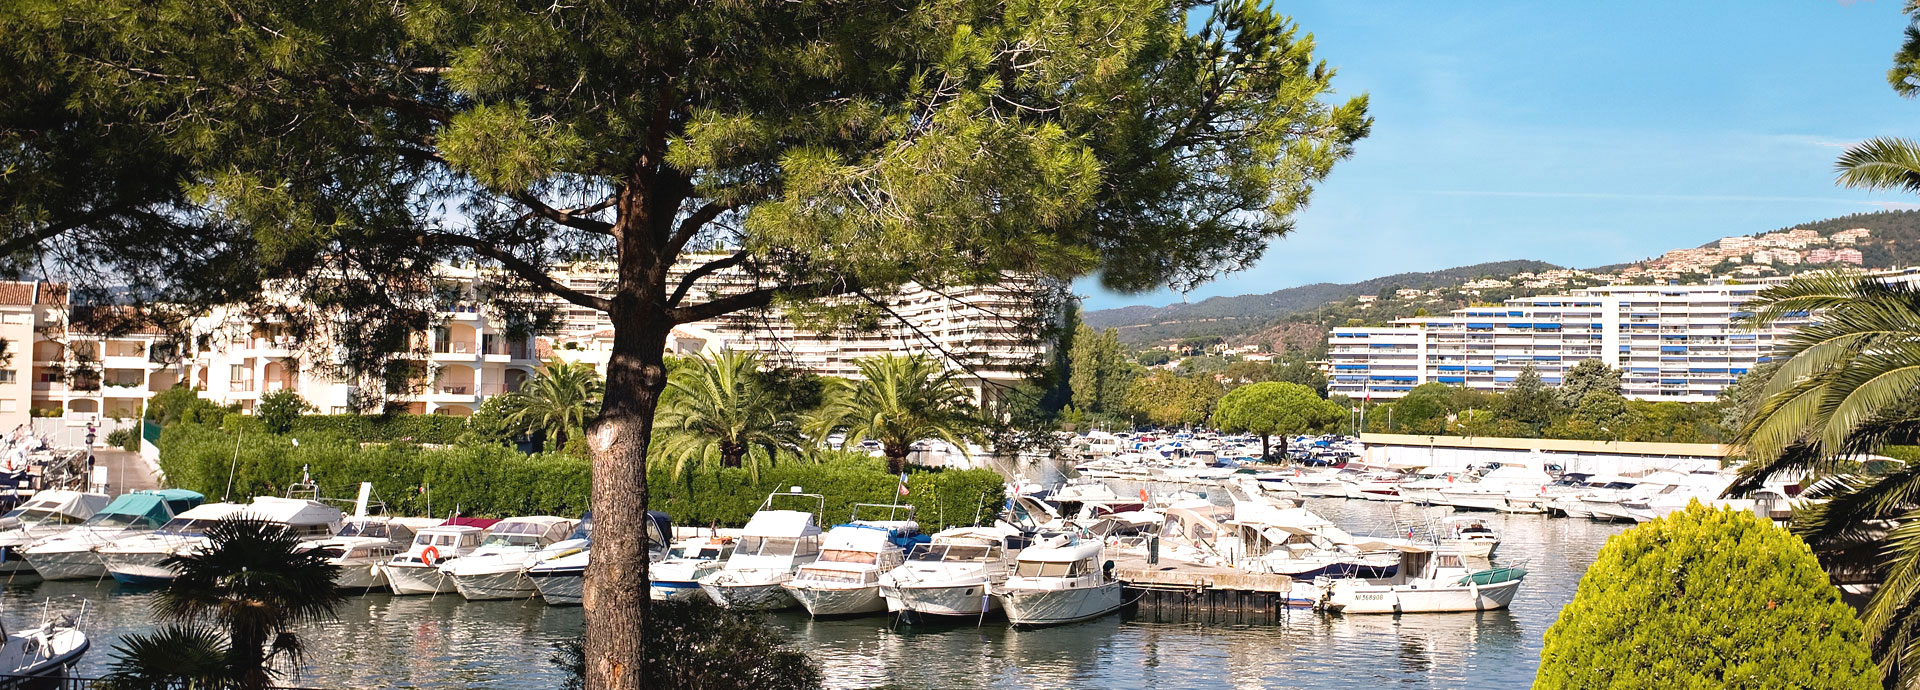 Holiday rental at Cannes Mandelieu-la-Napoule : Carre Marine residence